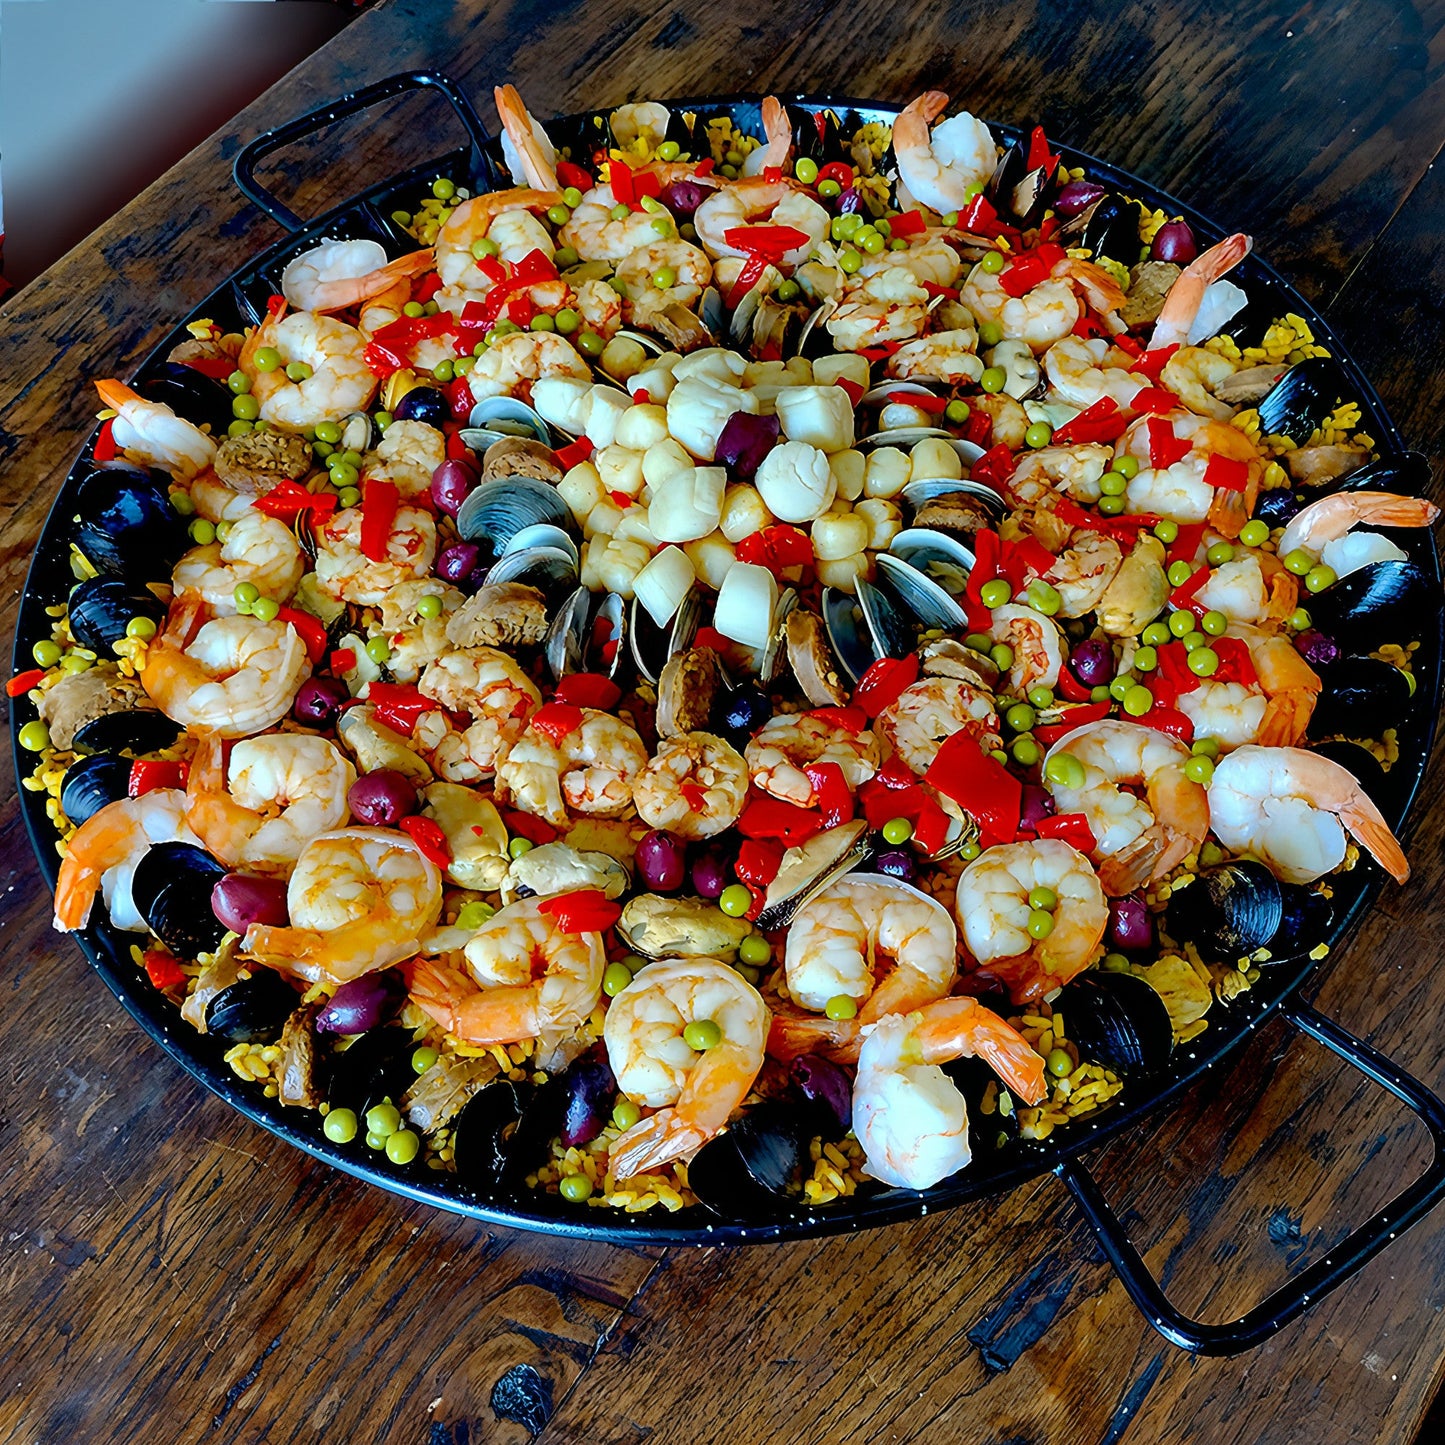 Shrimp medley, scallops, littleneck clams, mussels chicken chorizo paella for 8 guests.